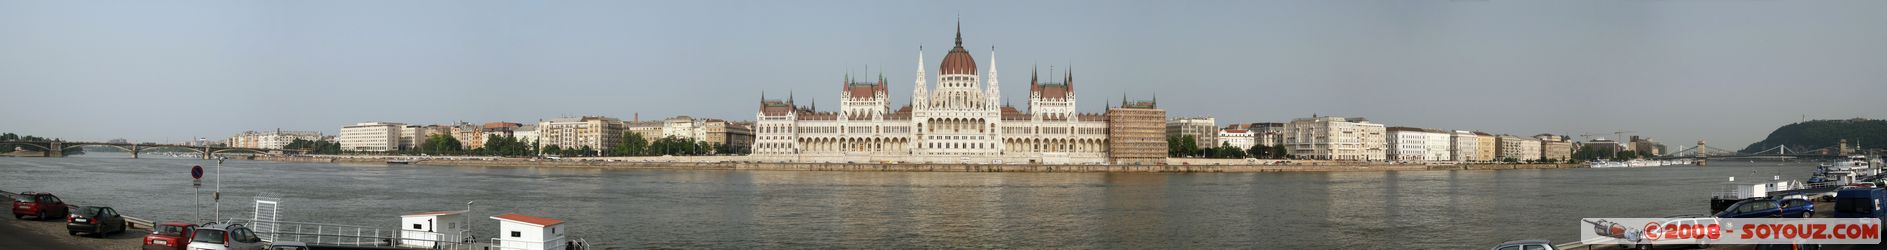 Budapest - Orszaghaz - Hungarian Parliament Building - panorama
Mots-clés: panorama Danube Riviere Orszaghaz